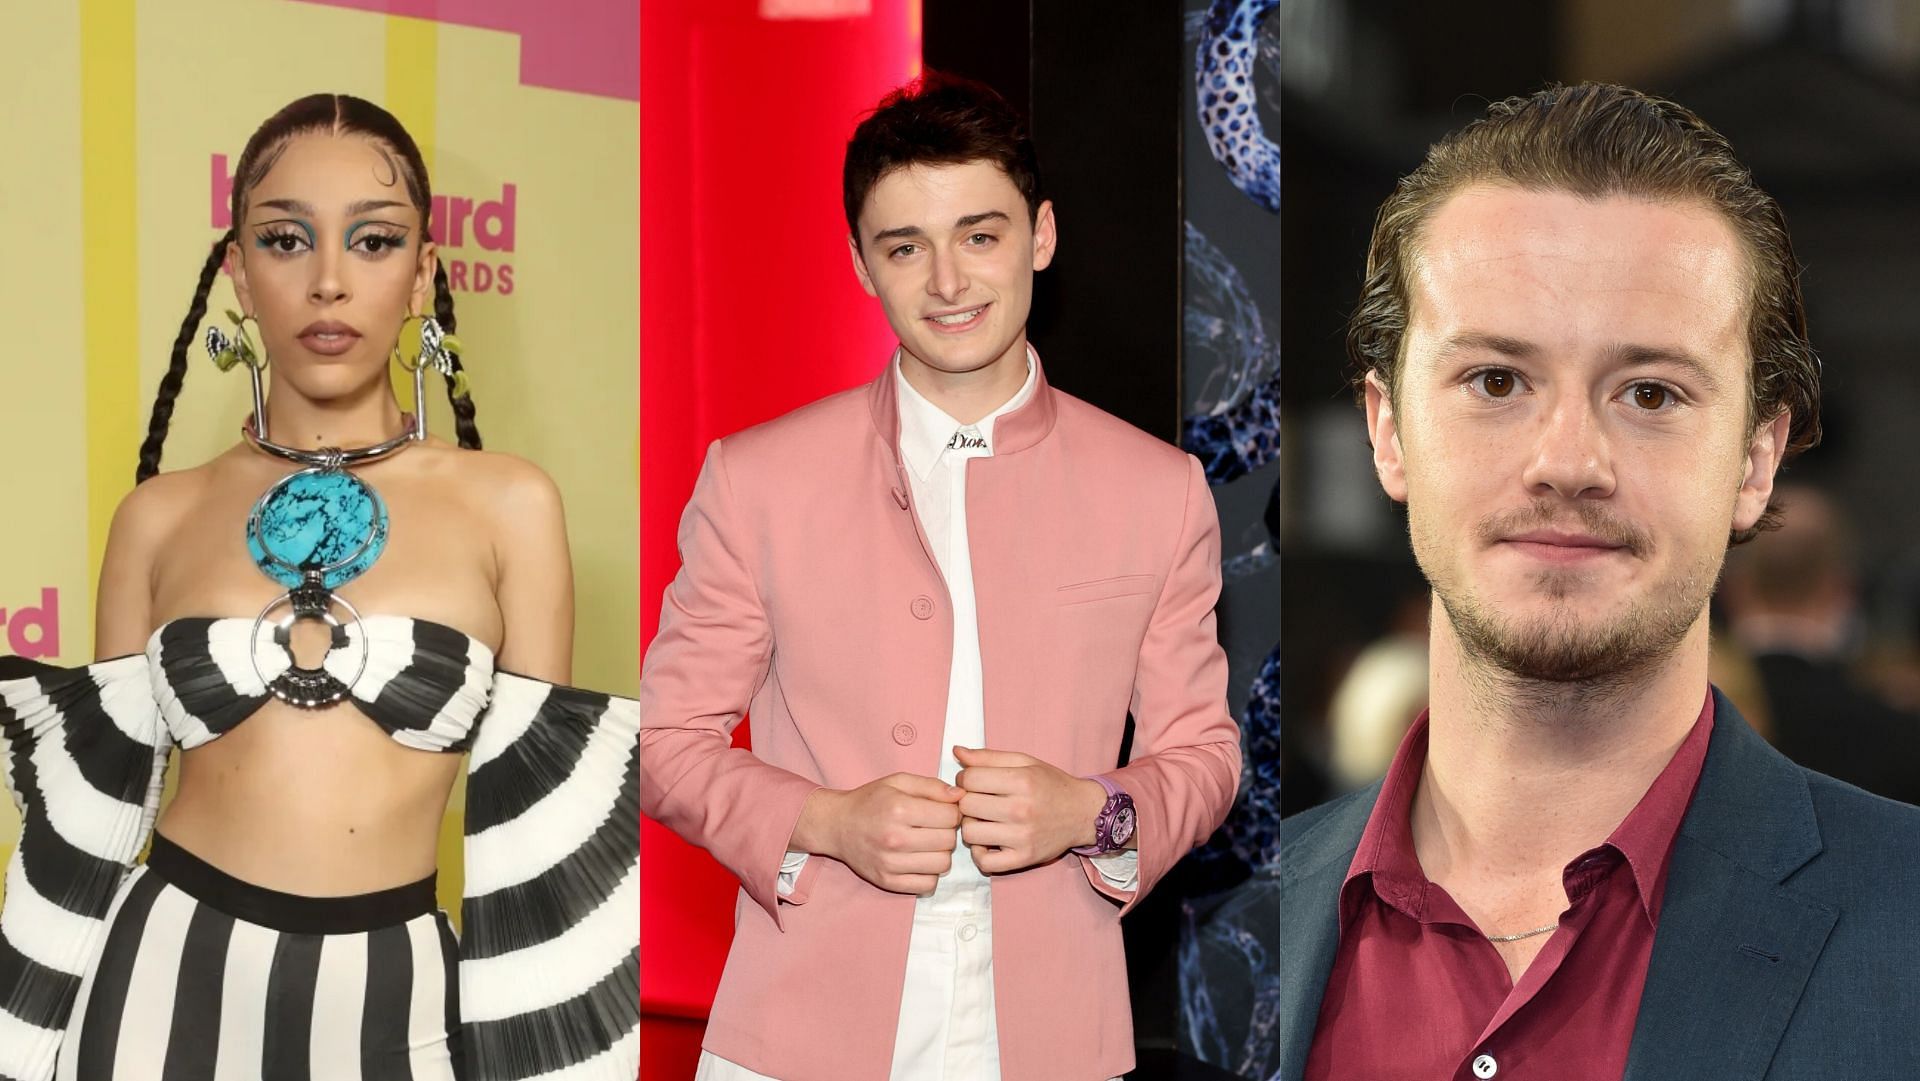 Doja Cat expressed her romantic interest in Joseph Quinn while talking to Noah Schnapp. (Image via Todd Williamson/Getty, Cindy Ord/Getty, LightRocket/Getty)